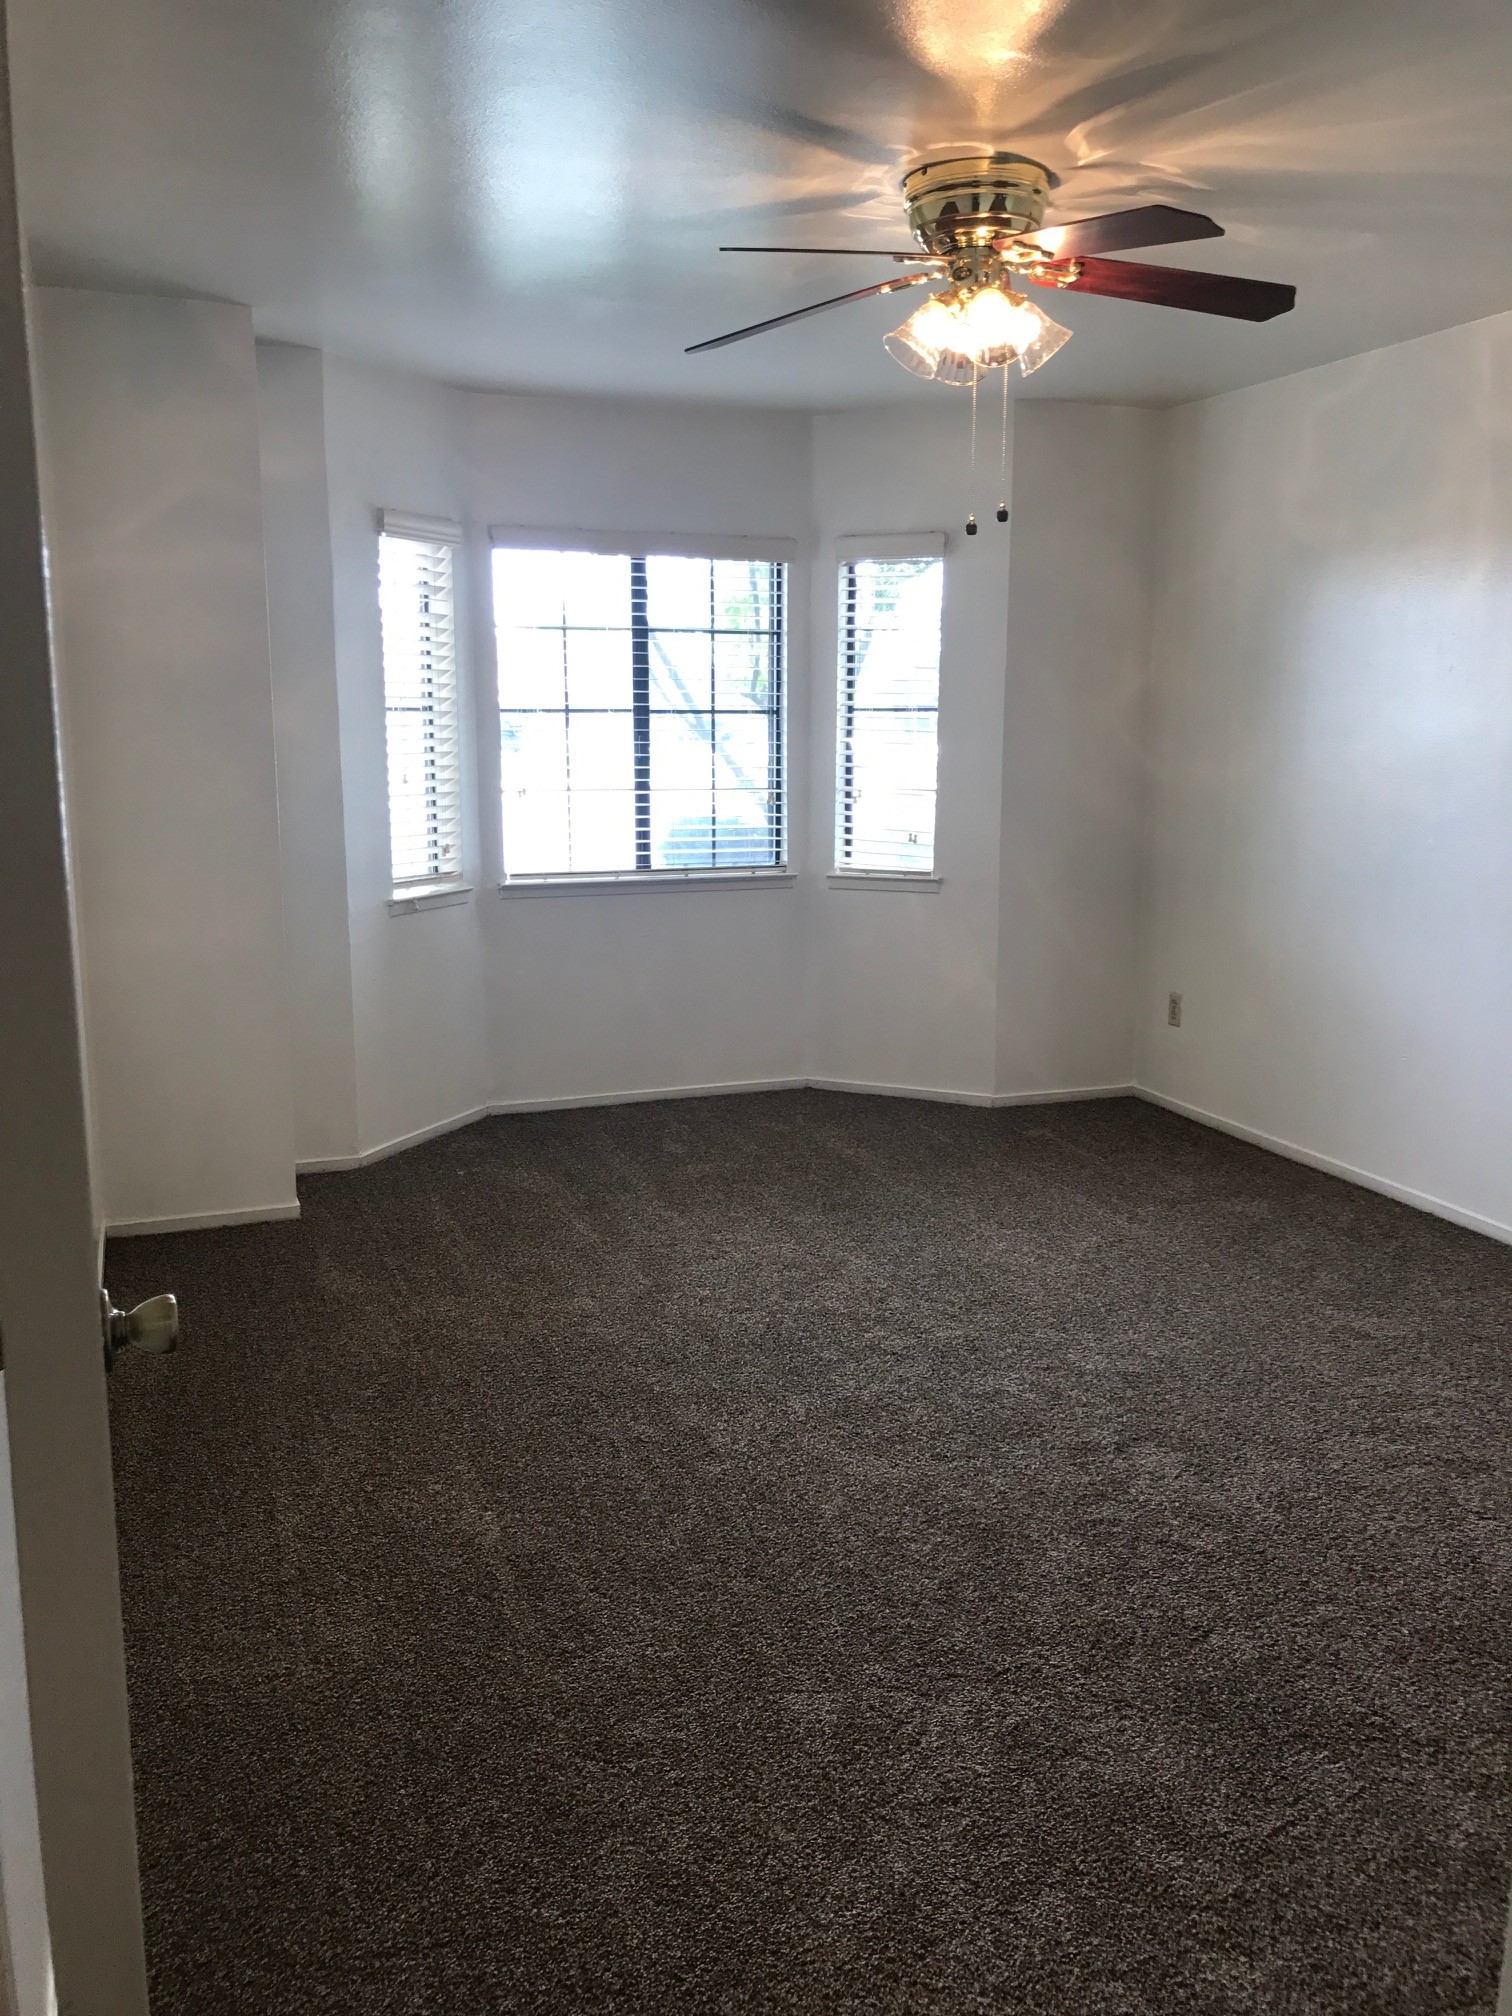 Carpeted vacant bedroom